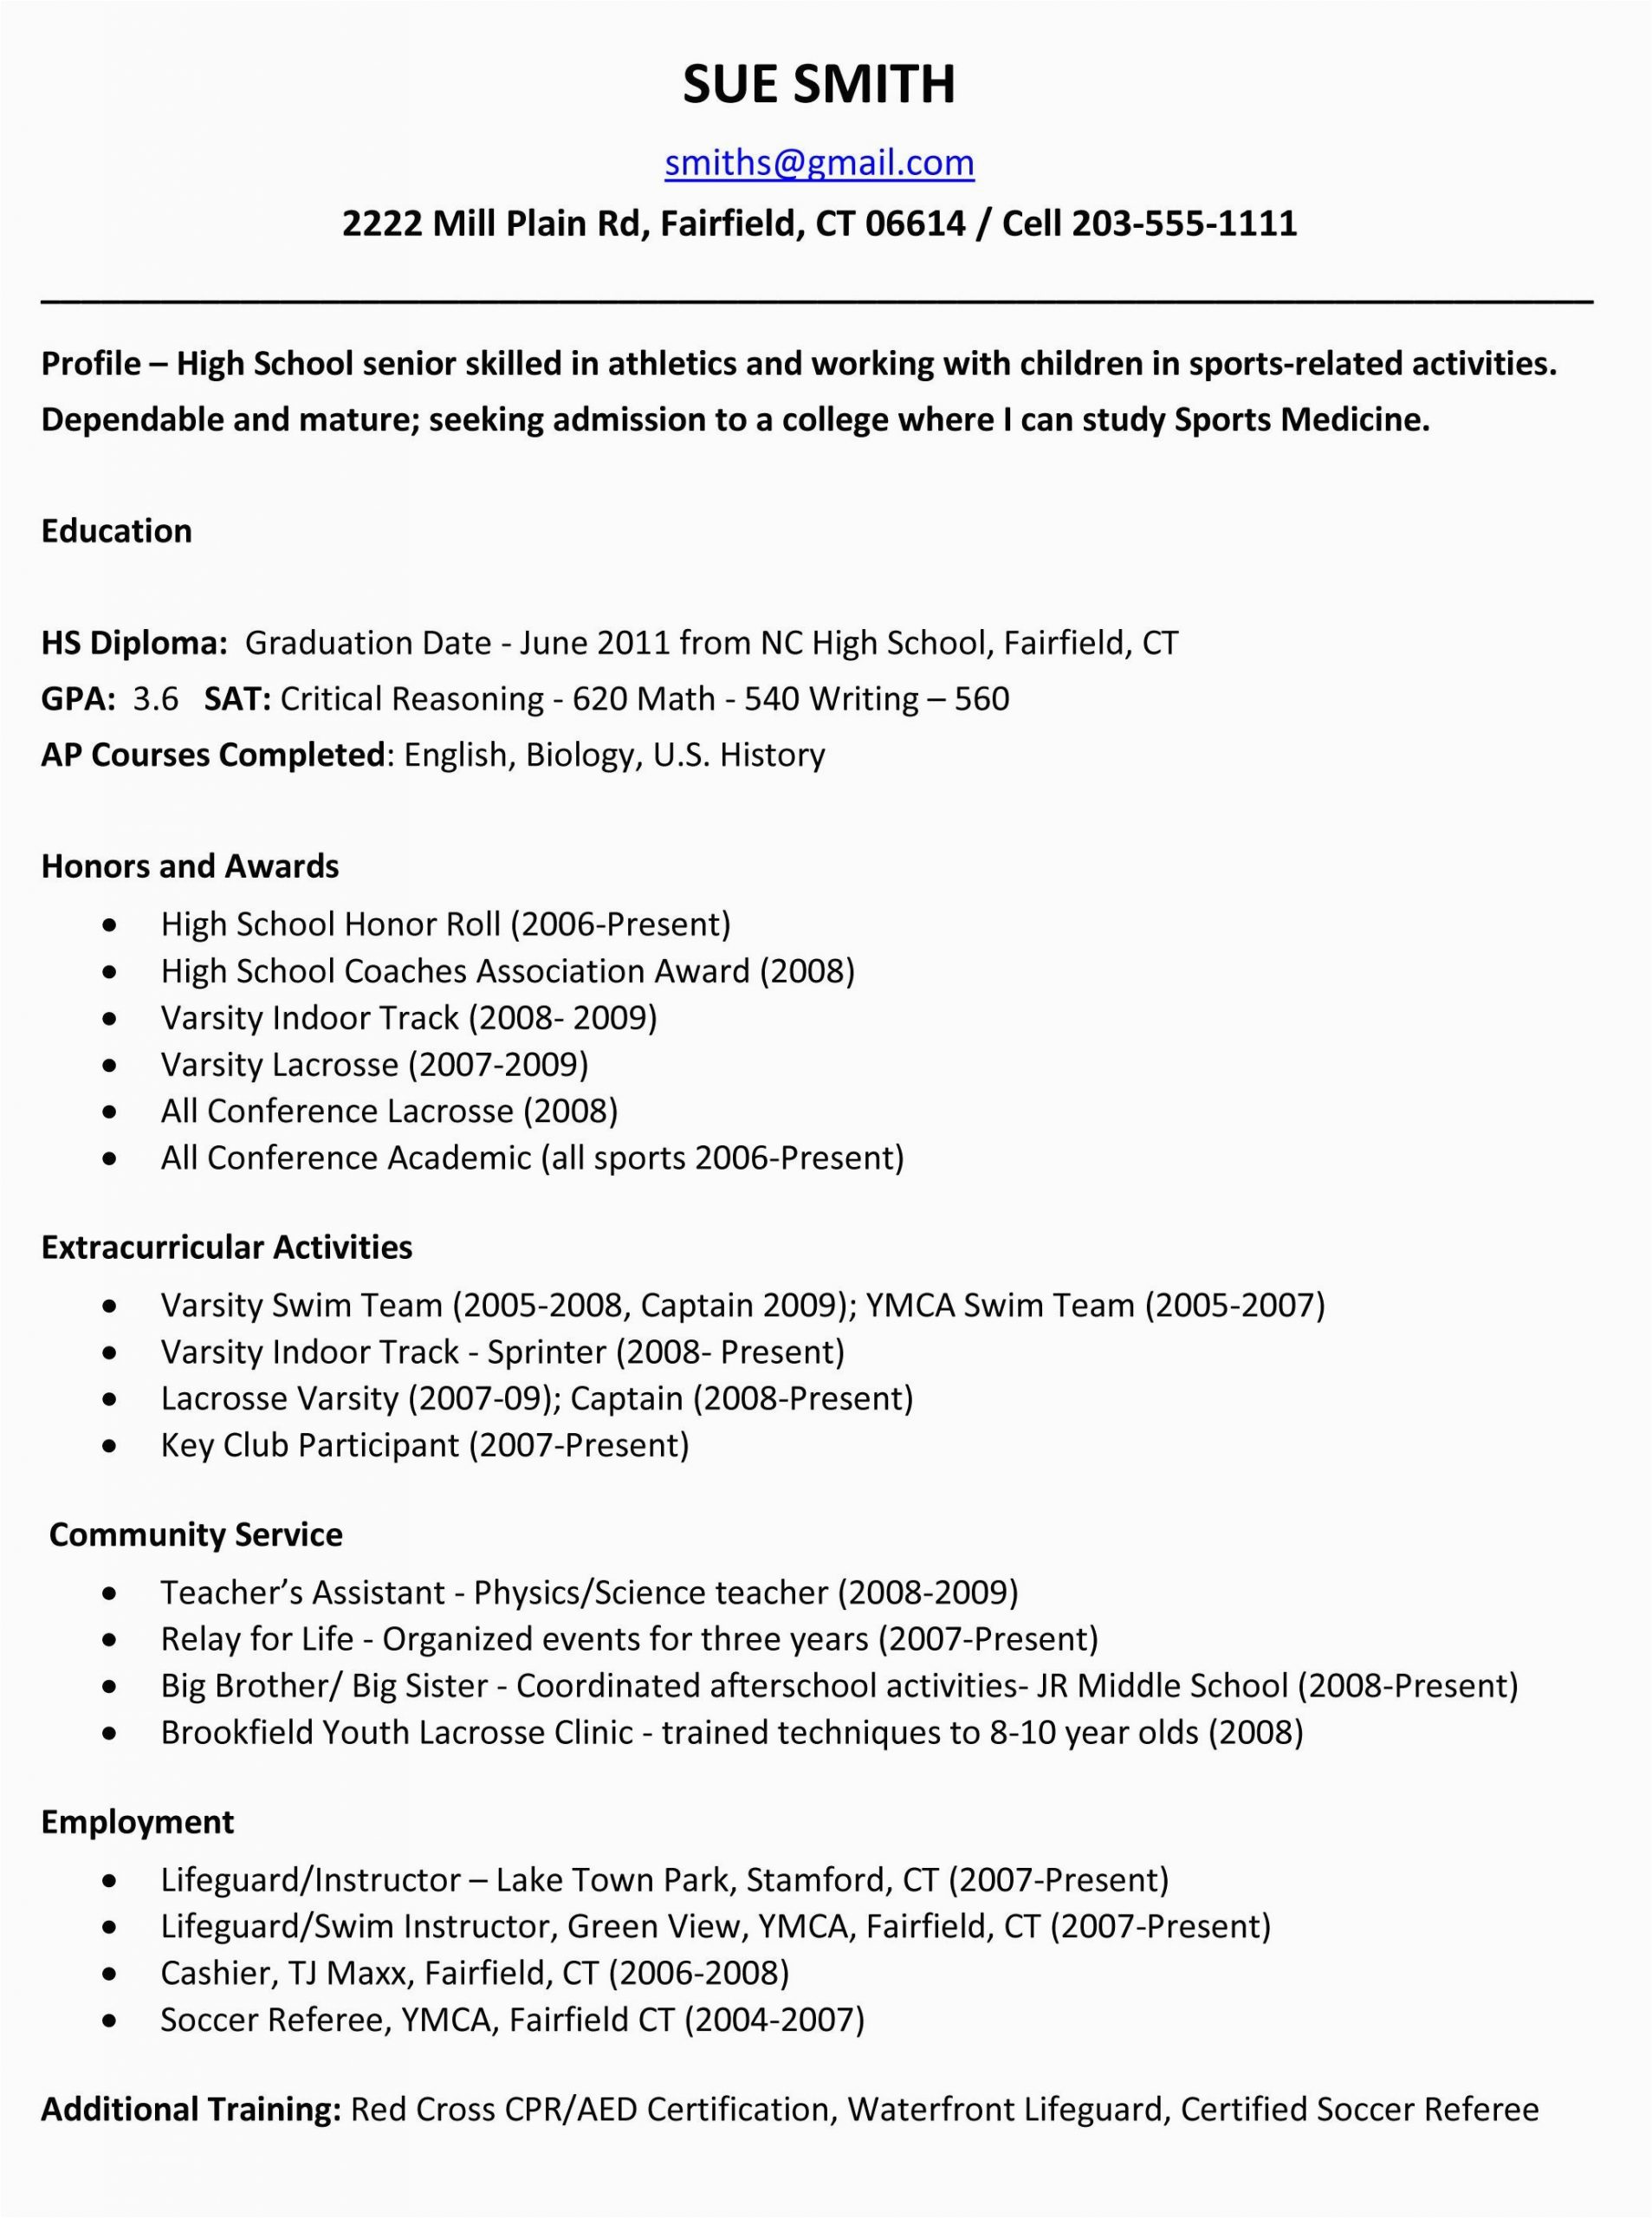 Template for High School Resume for College Admissions Sample Resumes